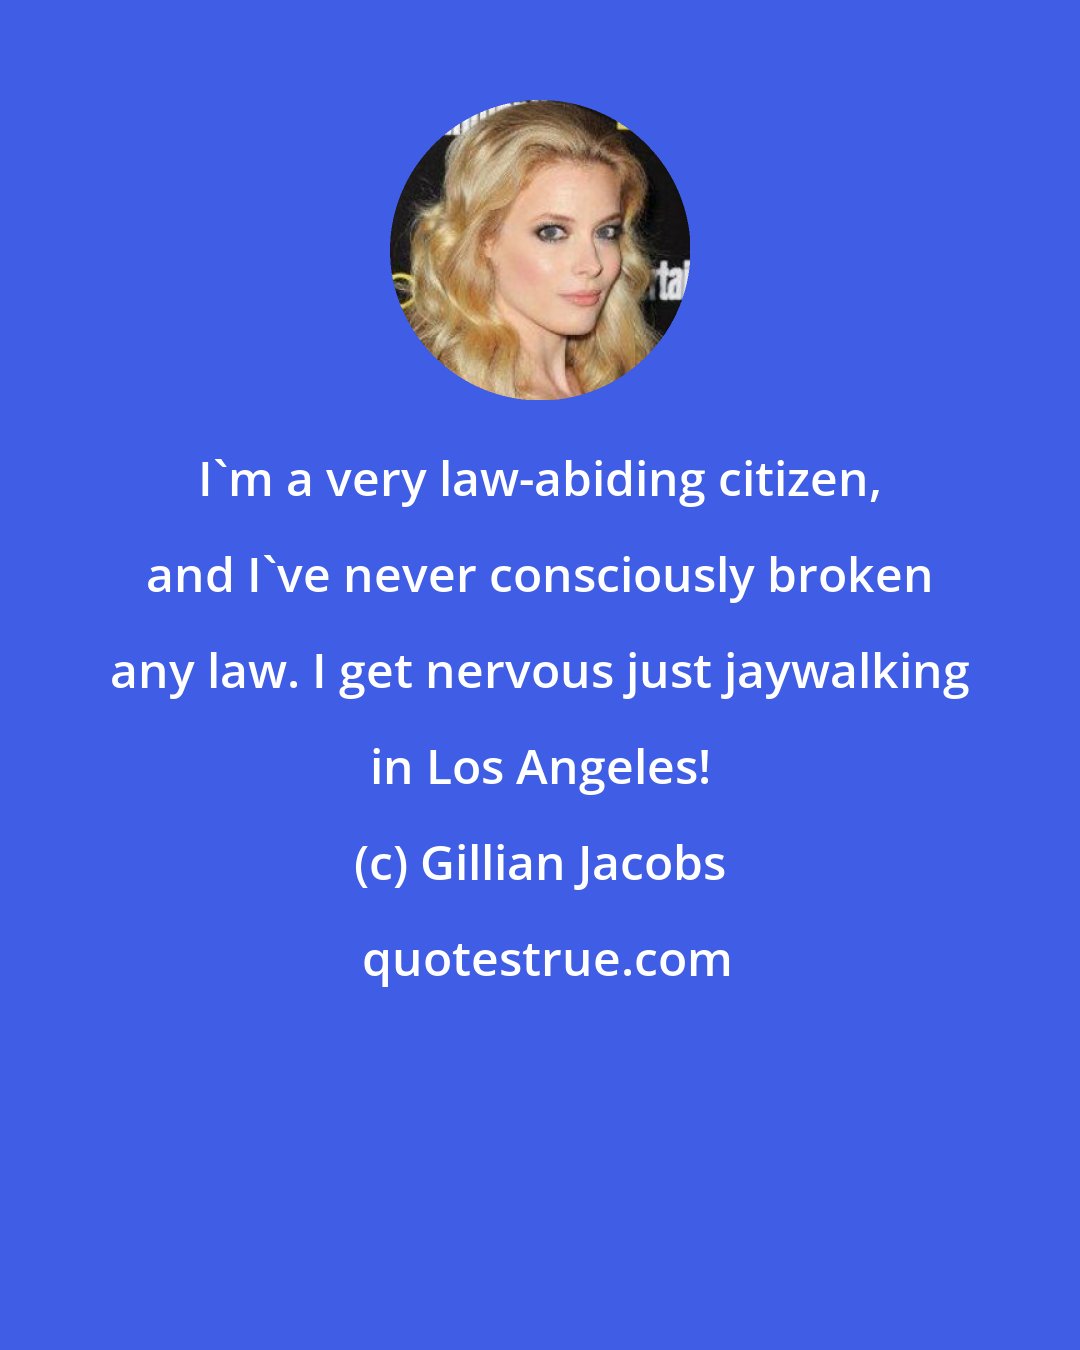 Gillian Jacobs: I'm a very law-abiding citizen, and I've never consciously broken any law. I get nervous just jaywalking in Los Angeles!